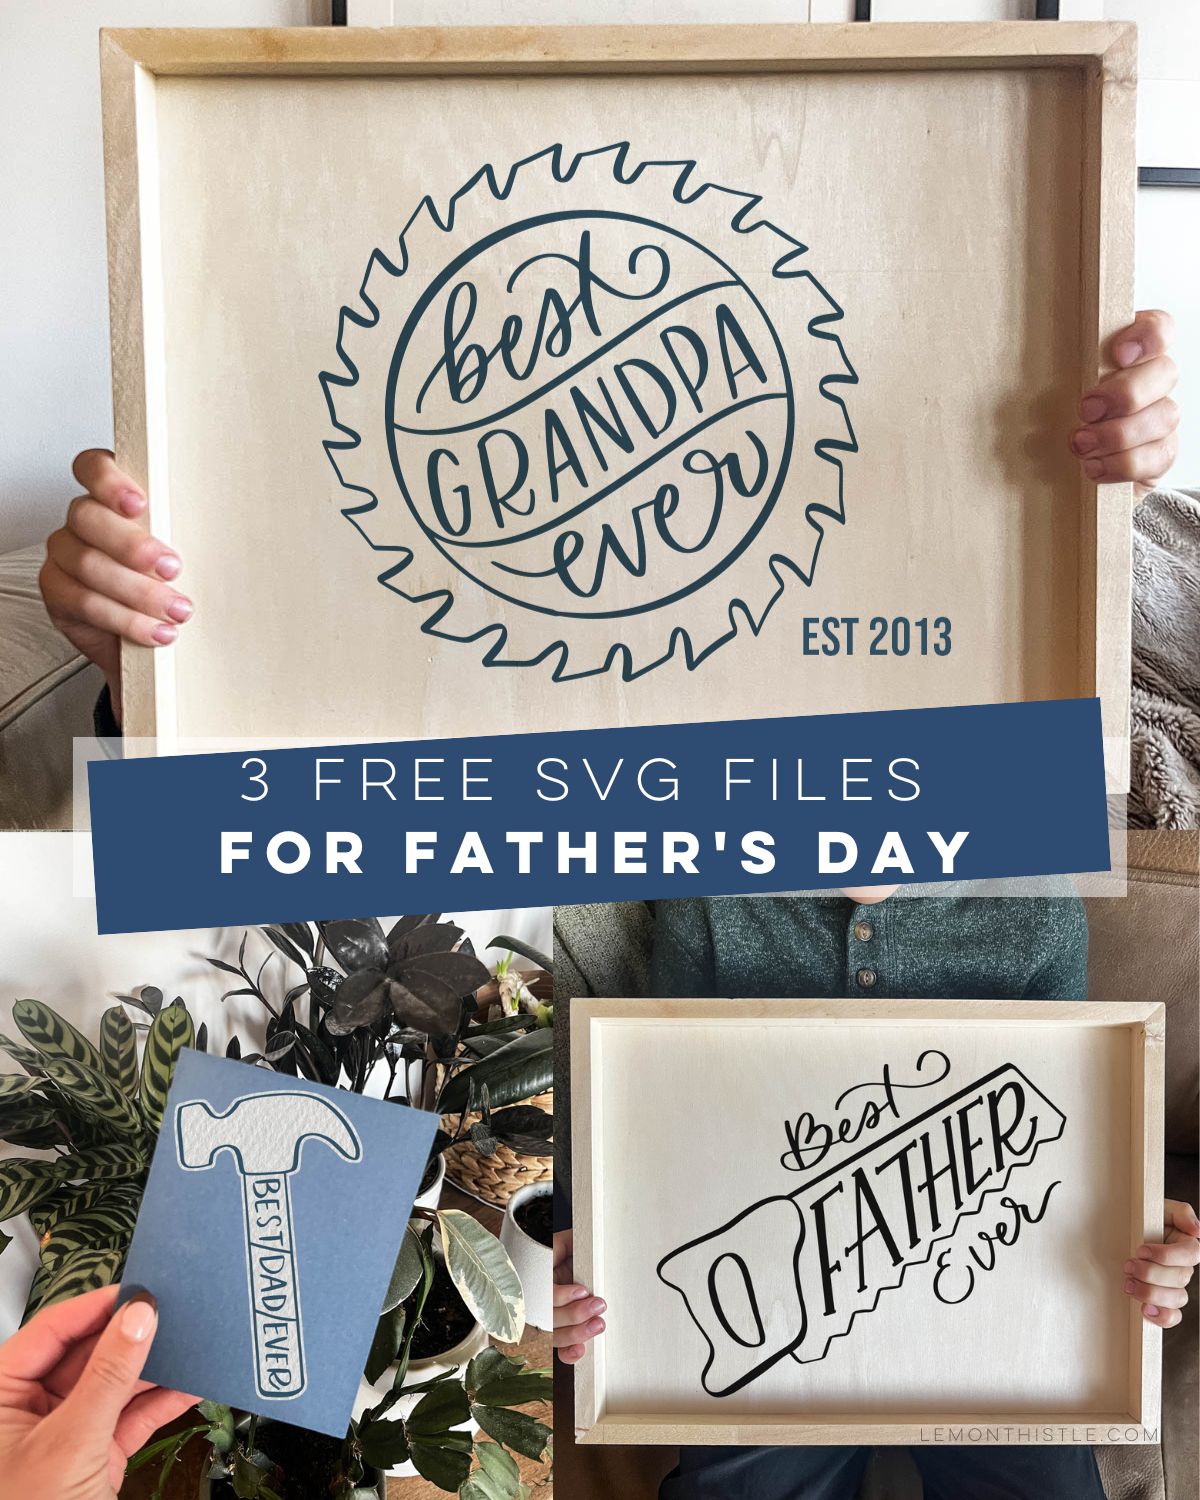 3 free svg files for father's day with collage of 3 projects made with the tool themed designs 'best dad ever', 'best father ever', 'best grandpa ever'